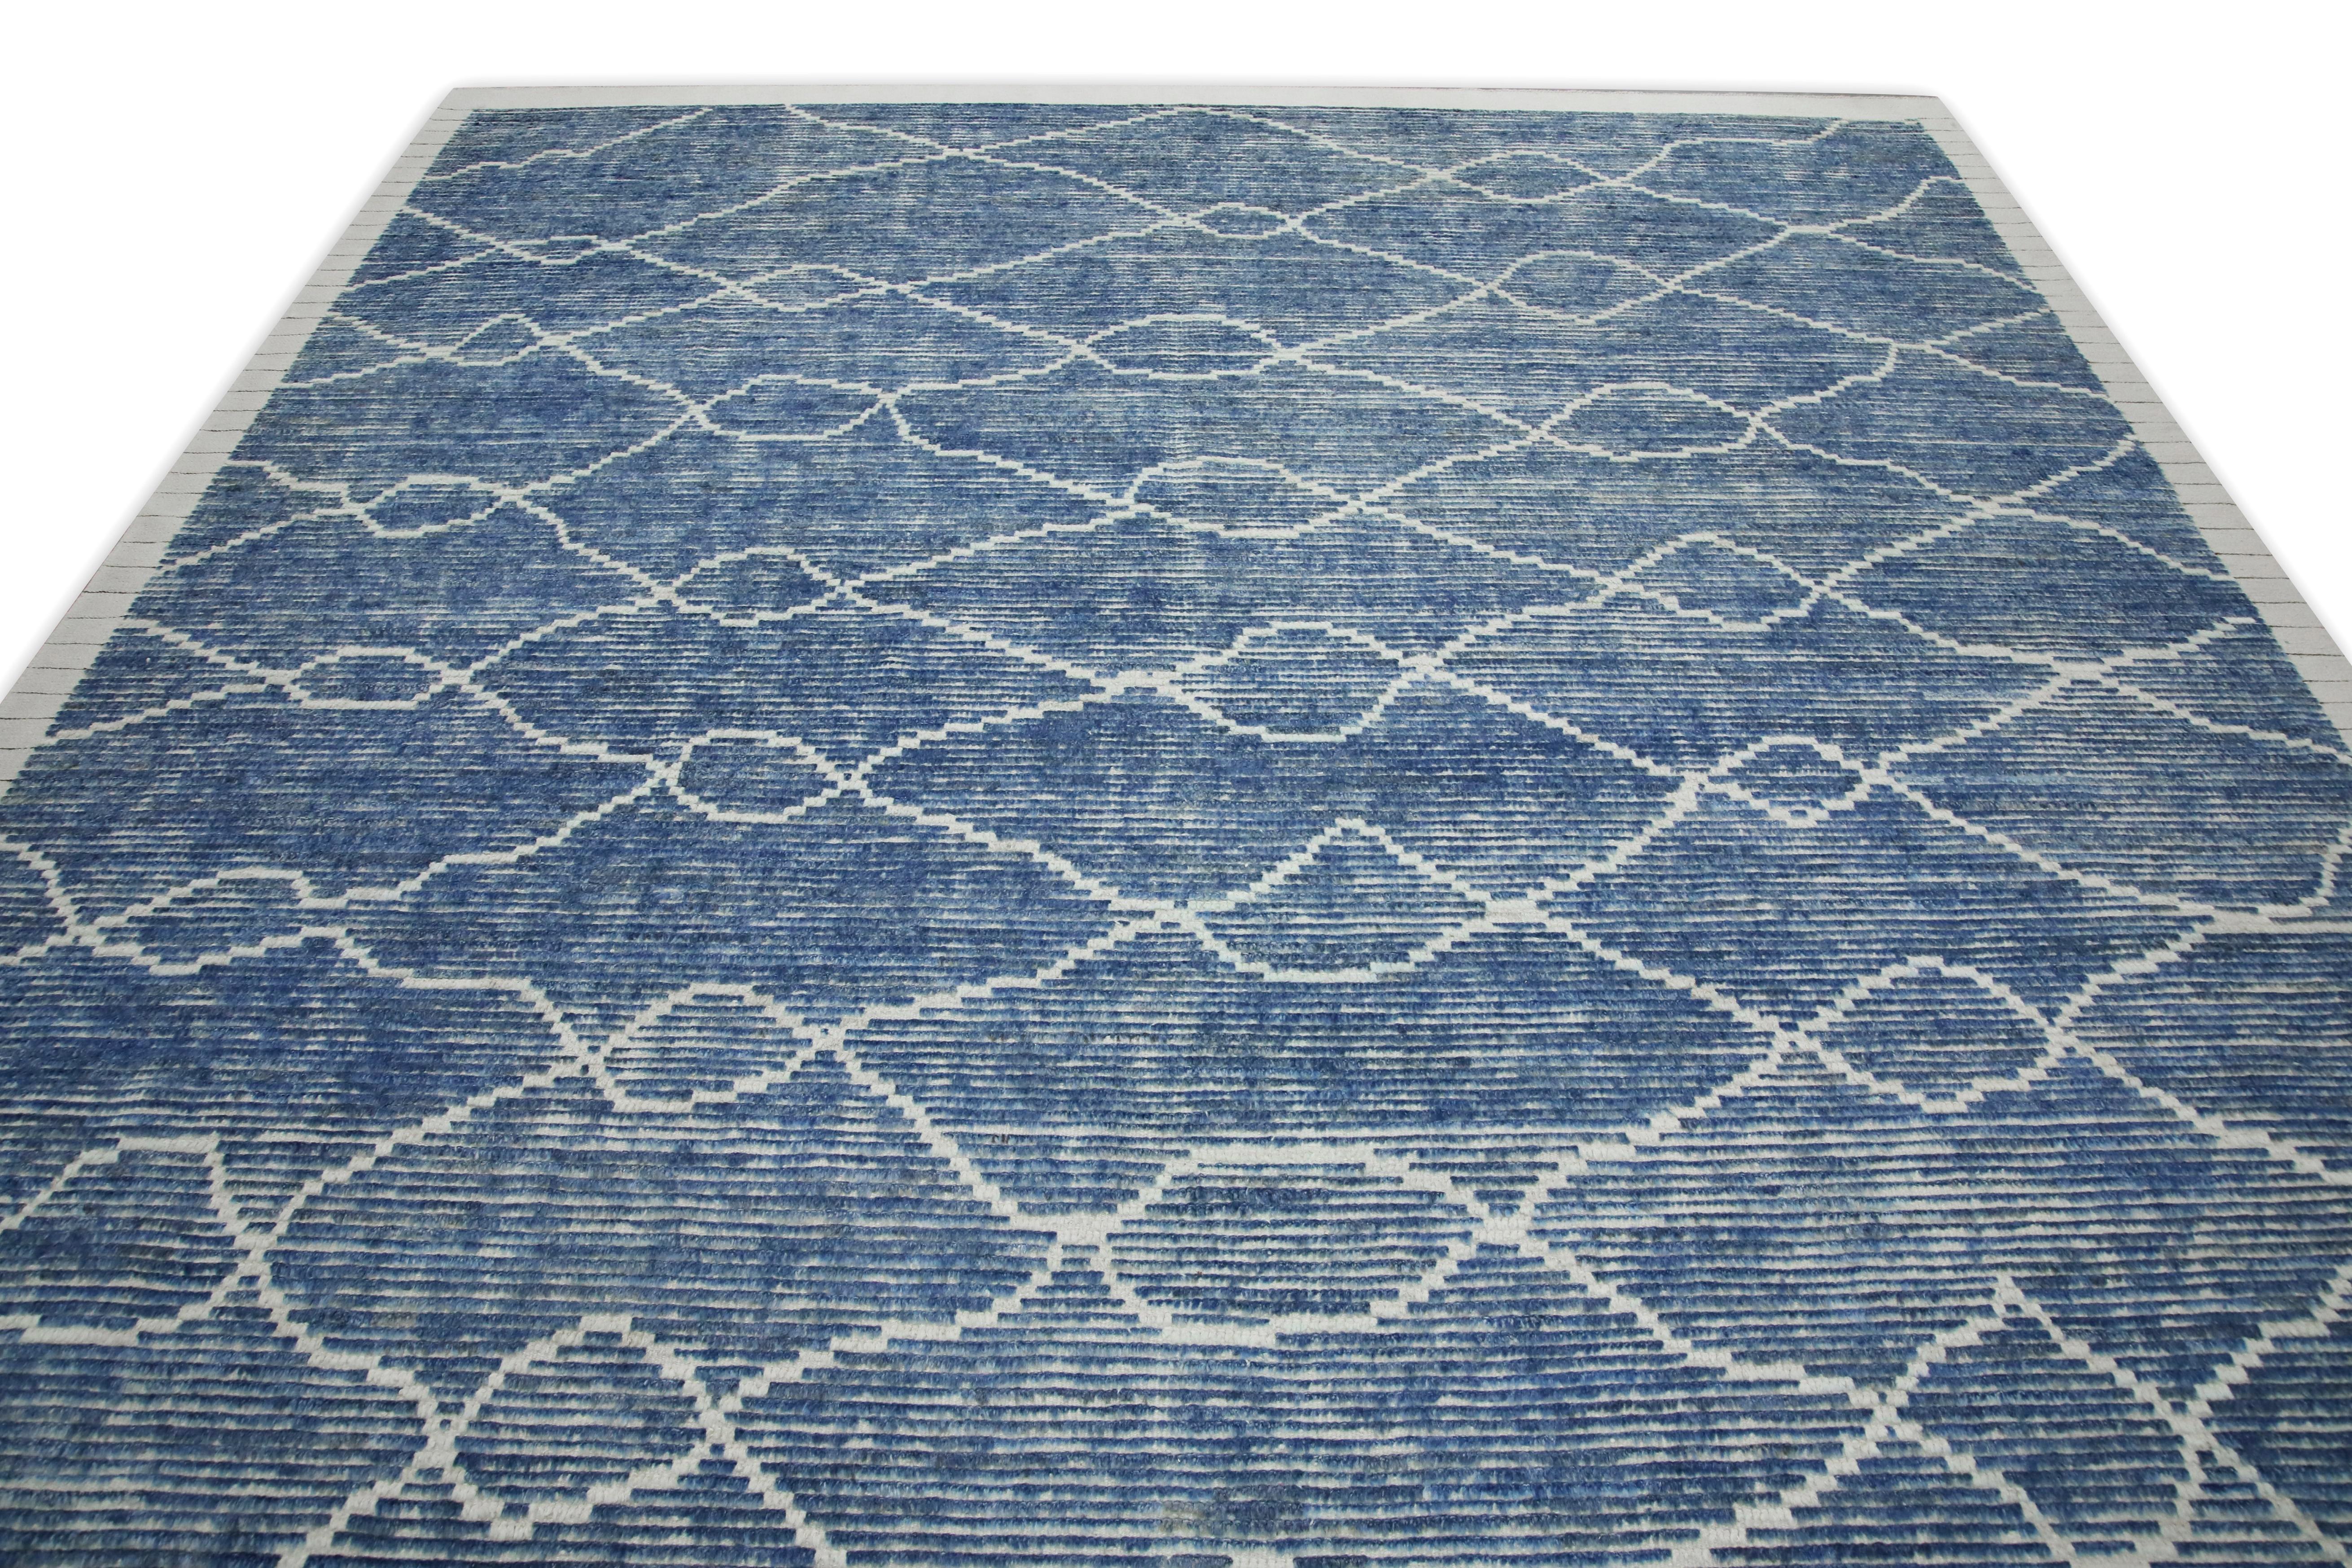 Vegetable Dyed 21st Century Modern Moroccan Style Wool Rug in Blue Design 9'5